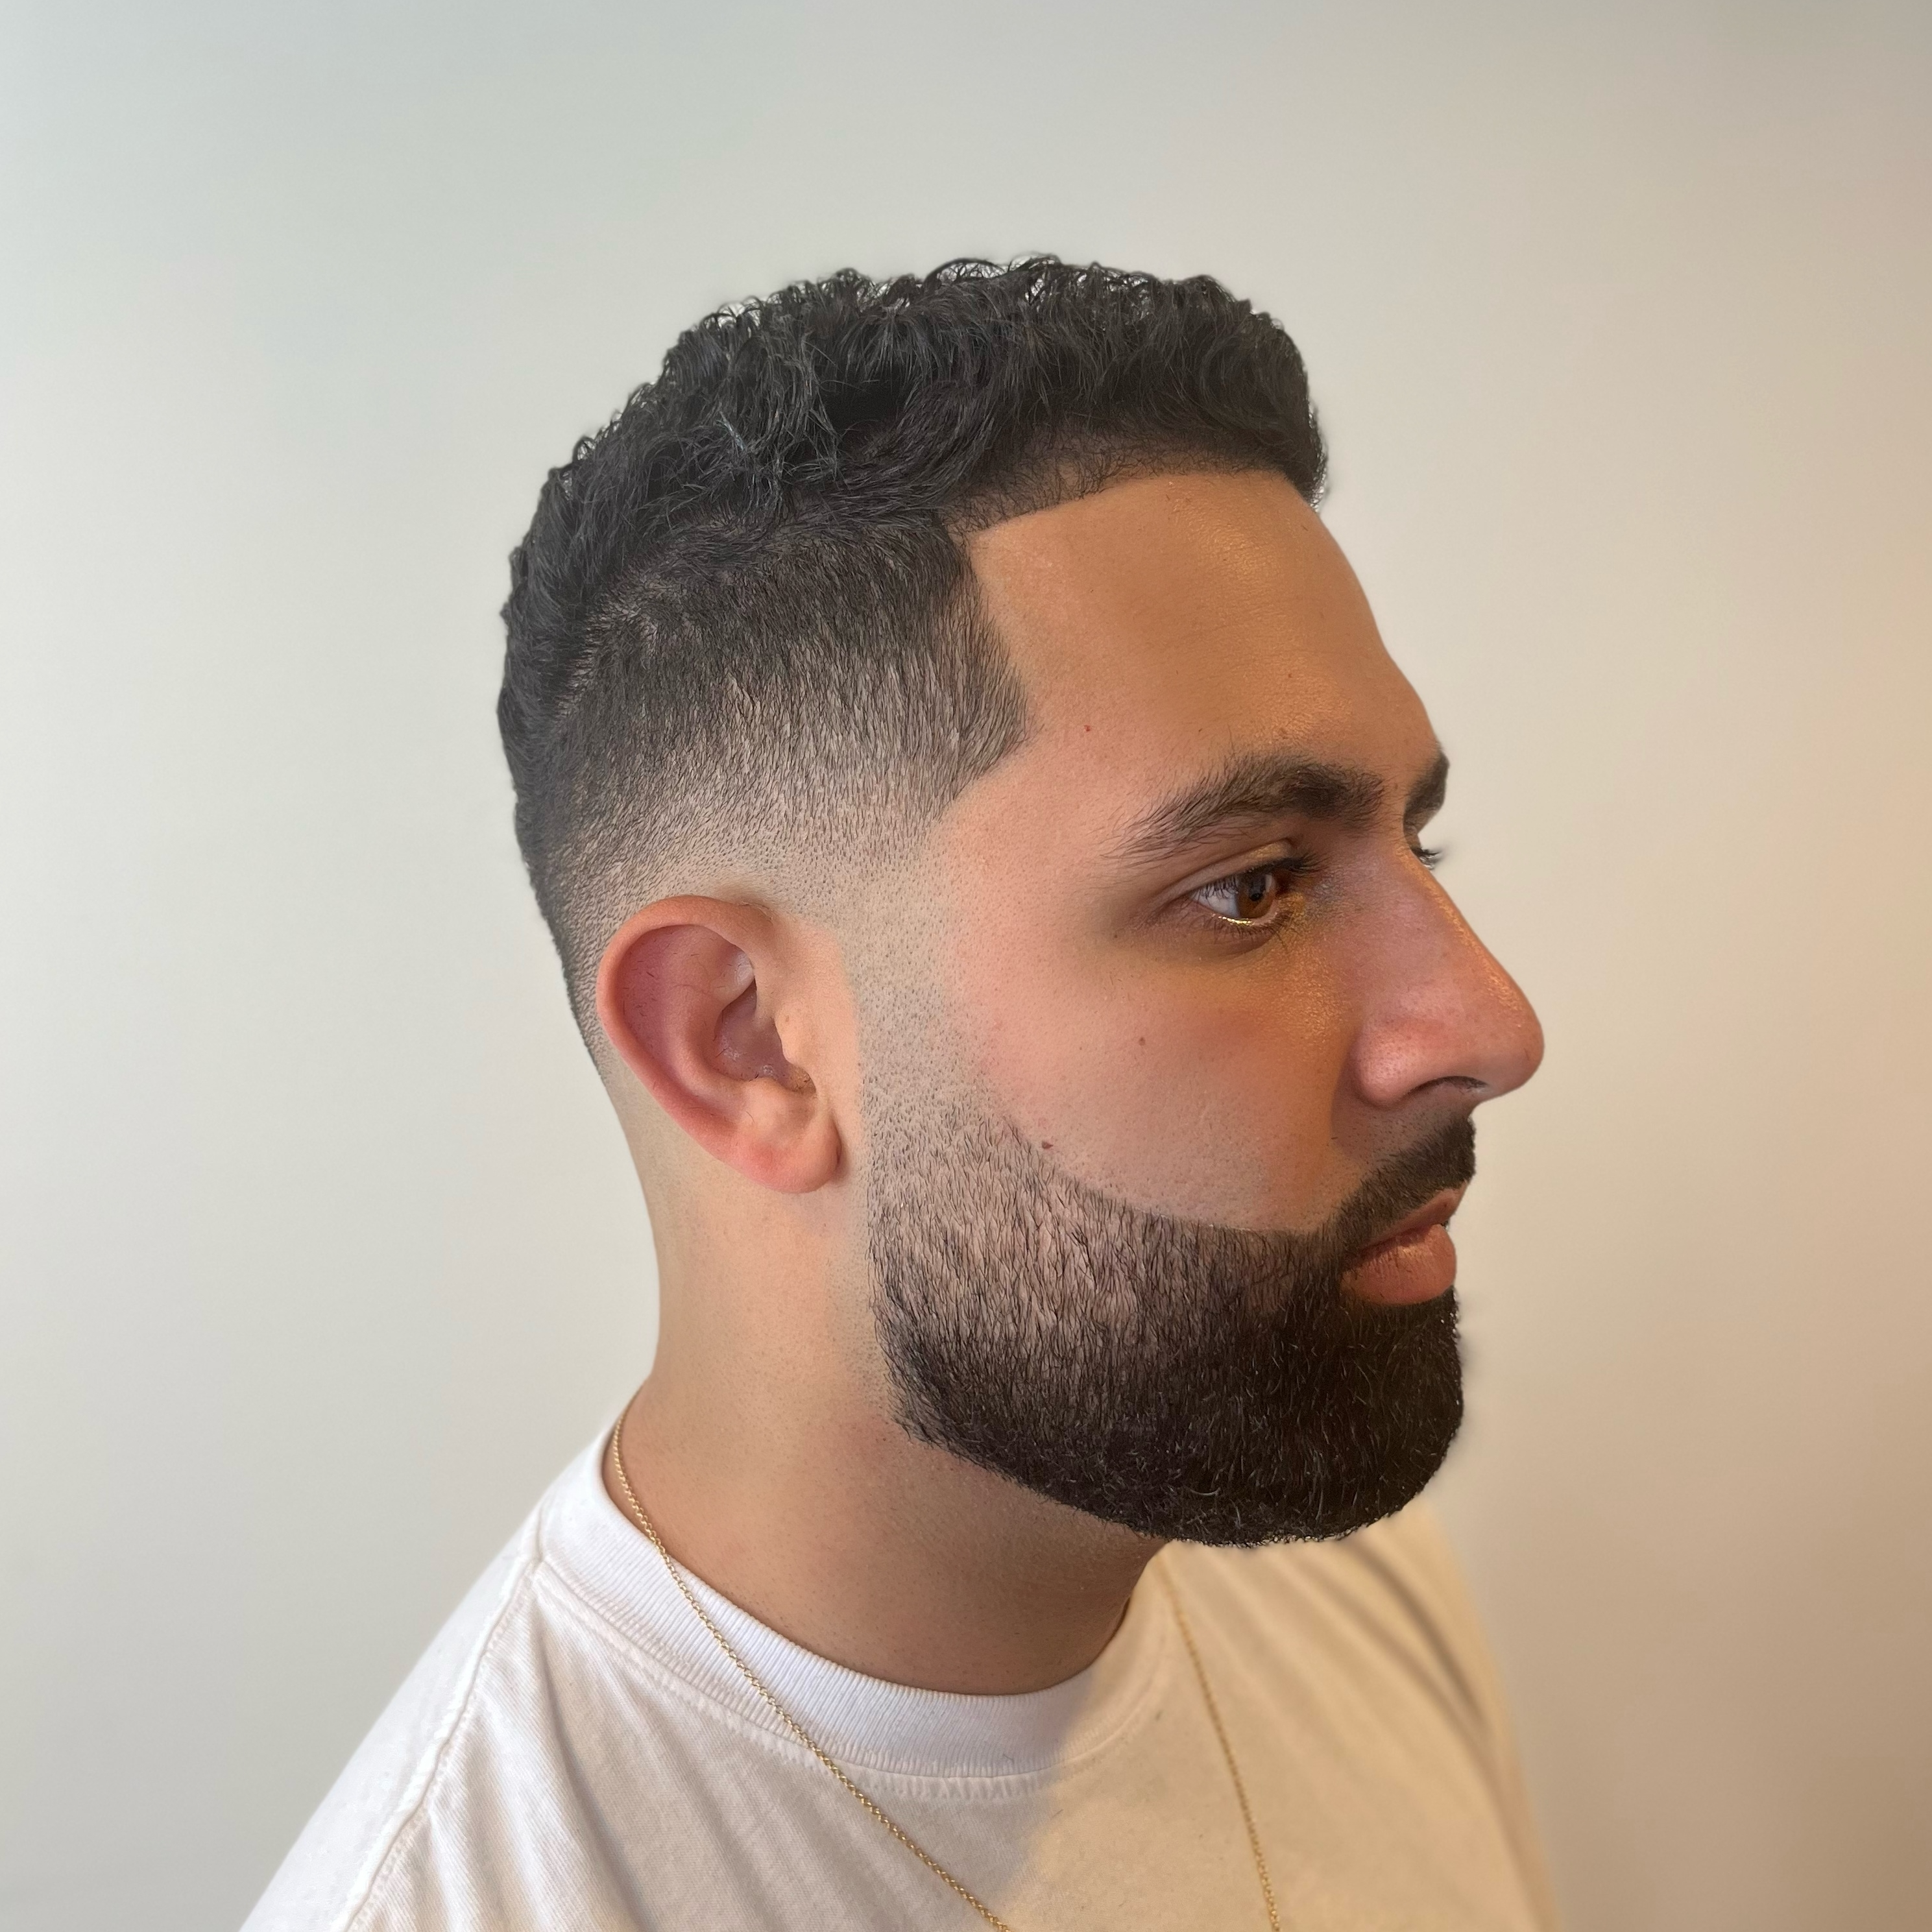 Man with low fade, textured crop haircut using andis clippers, and trimmed full beard and moustache.